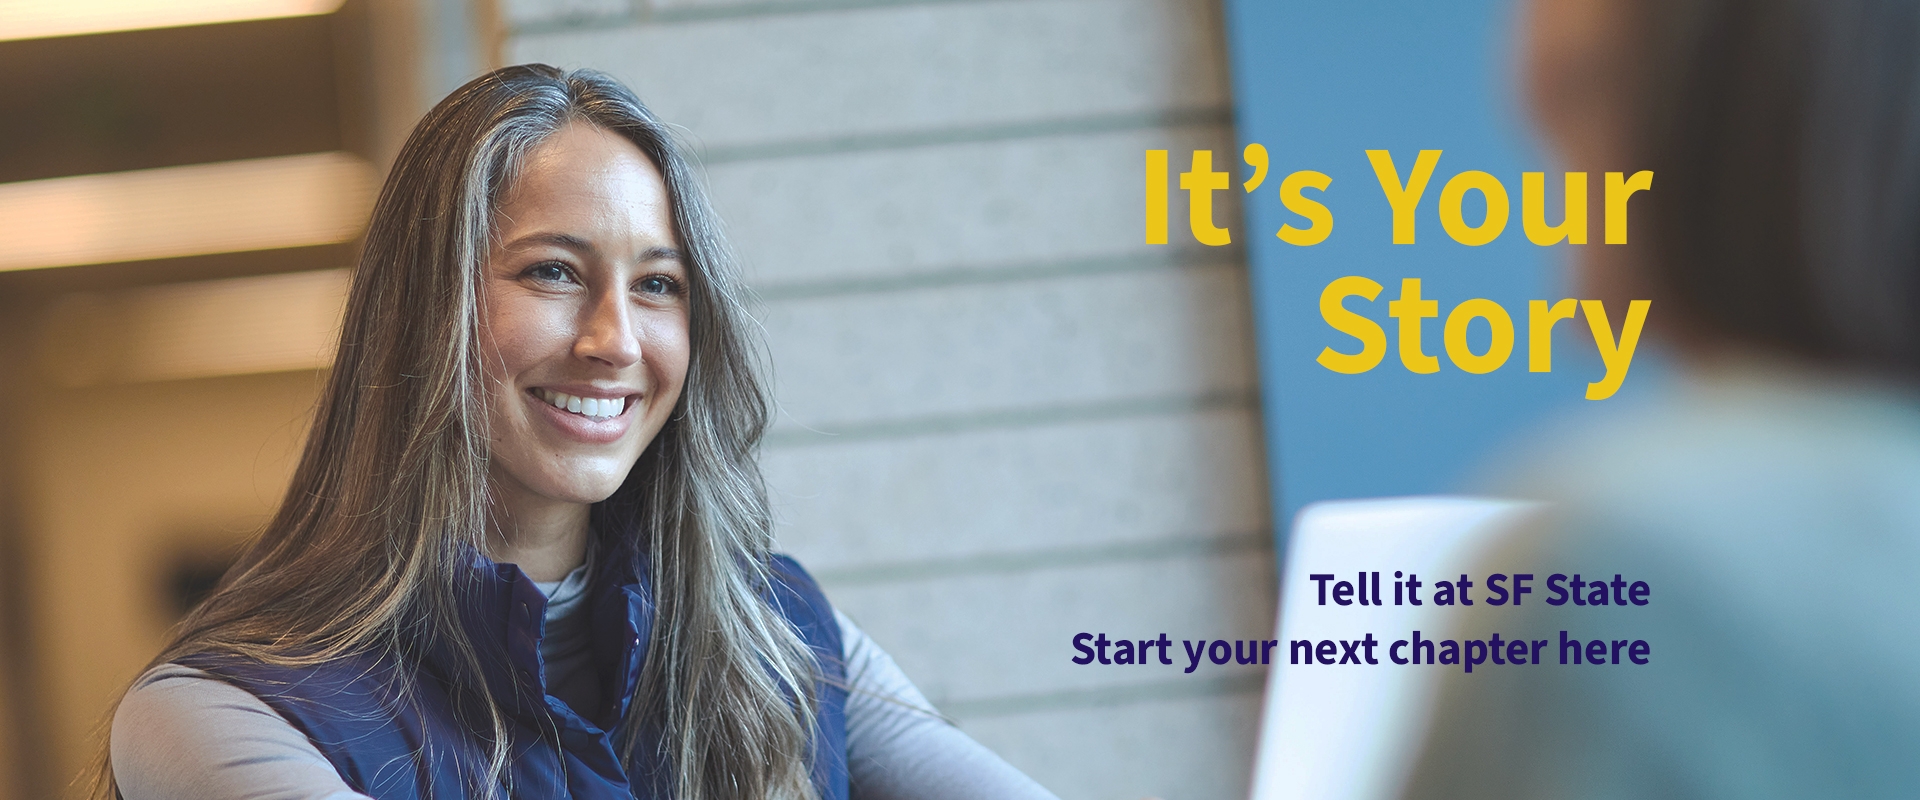 an SF State student smiling with the text "It's Your Story"